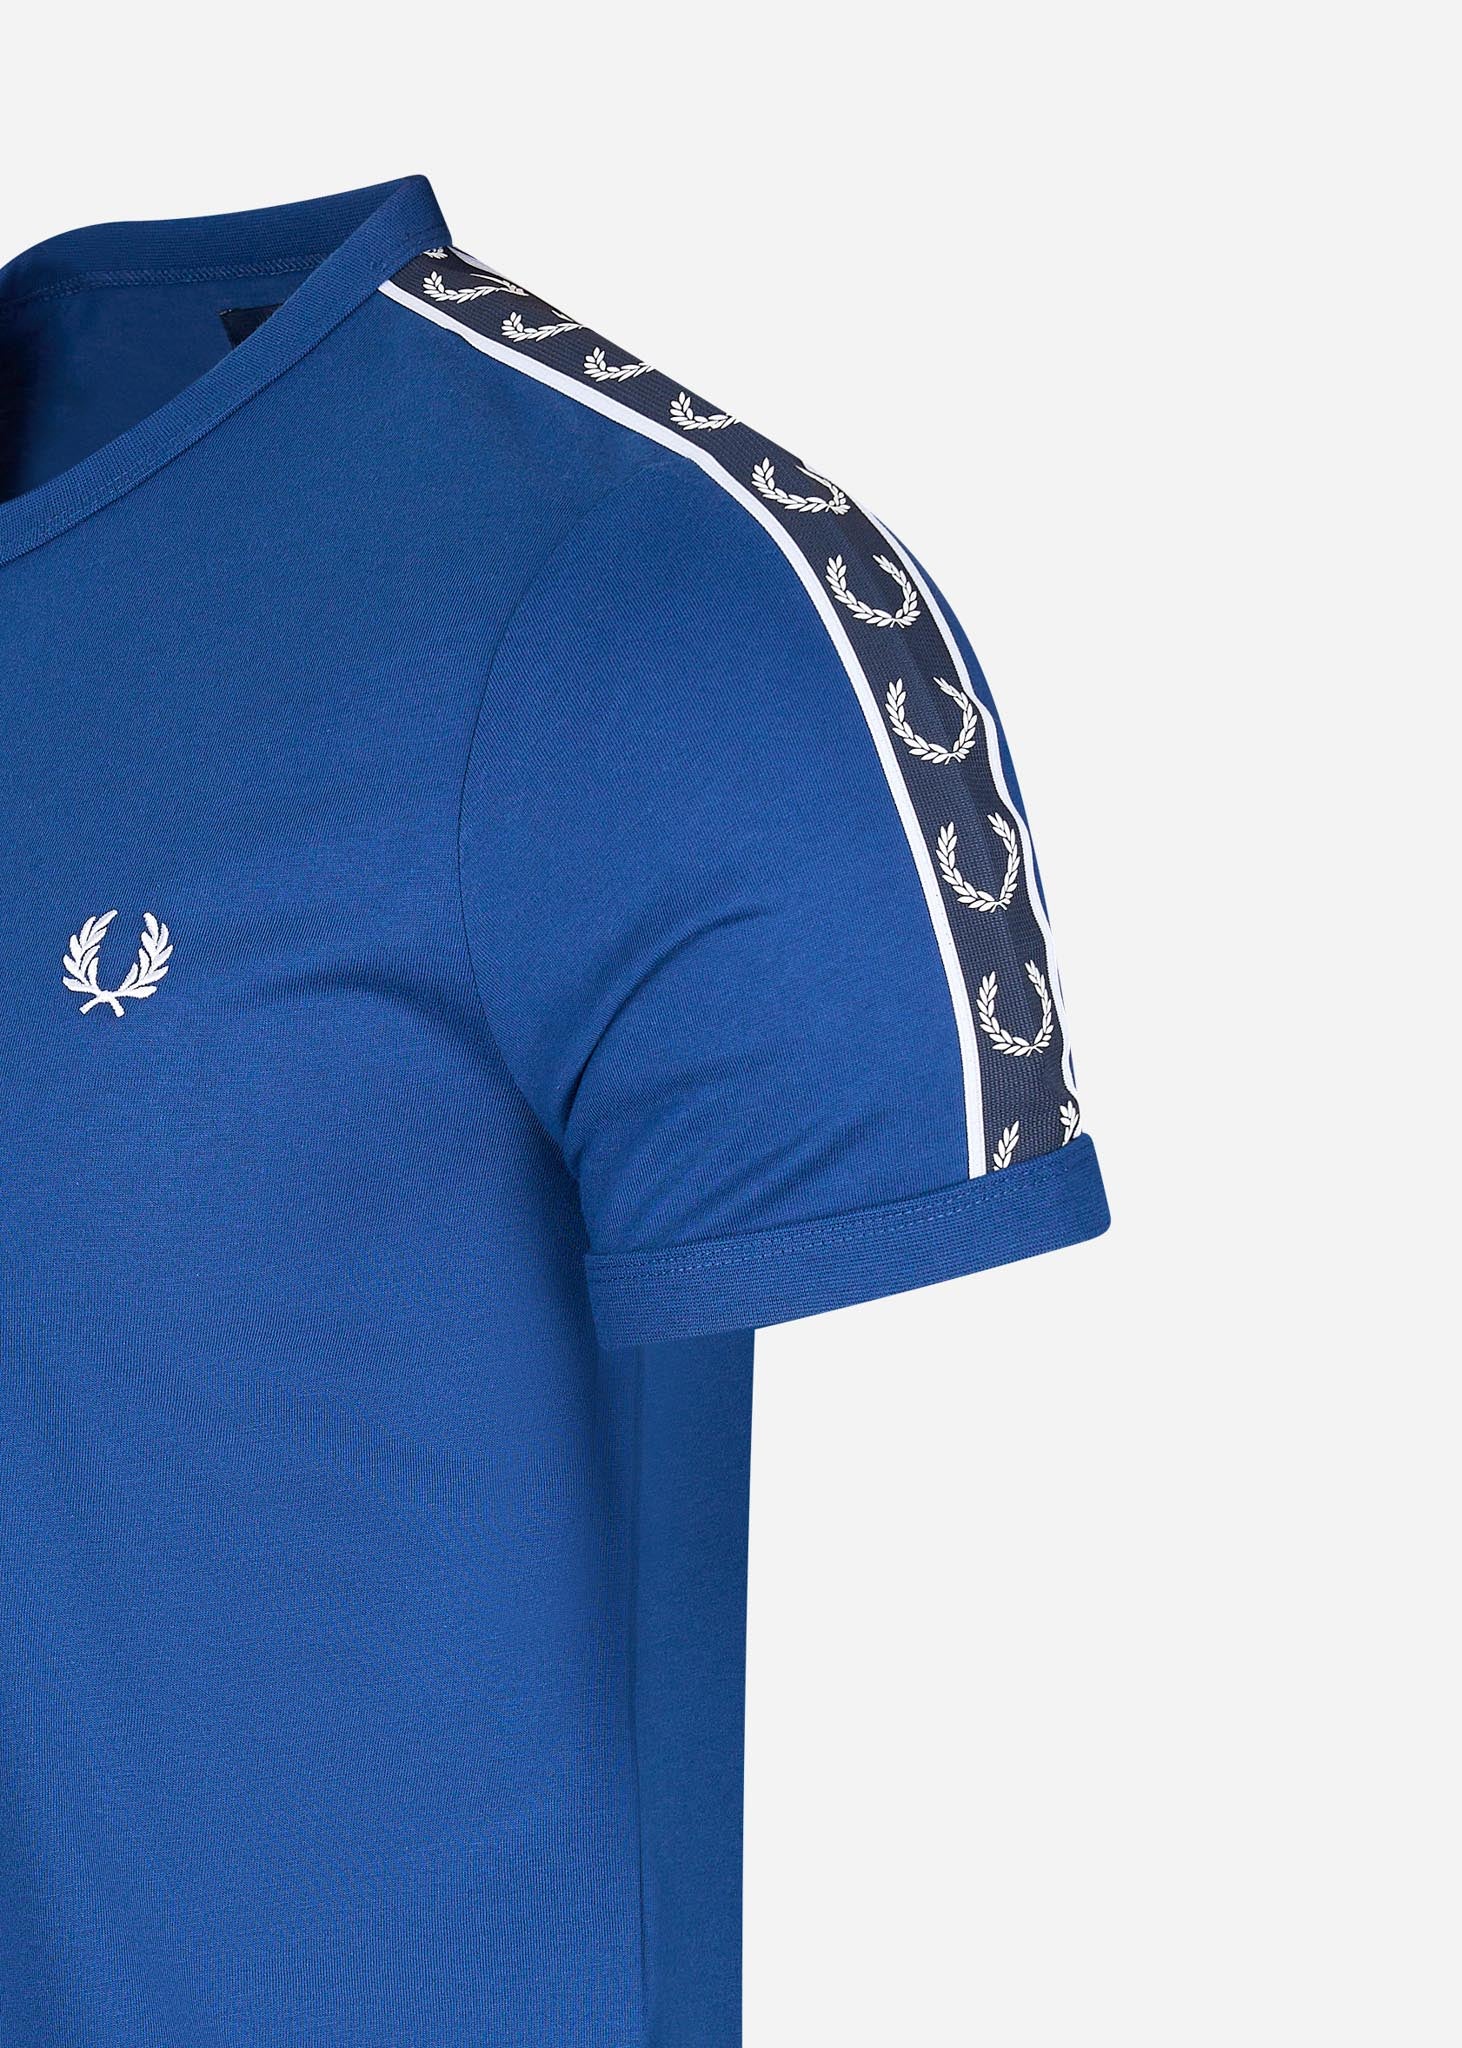 fred perry taped ringer t-shirt cobalt blauw blue